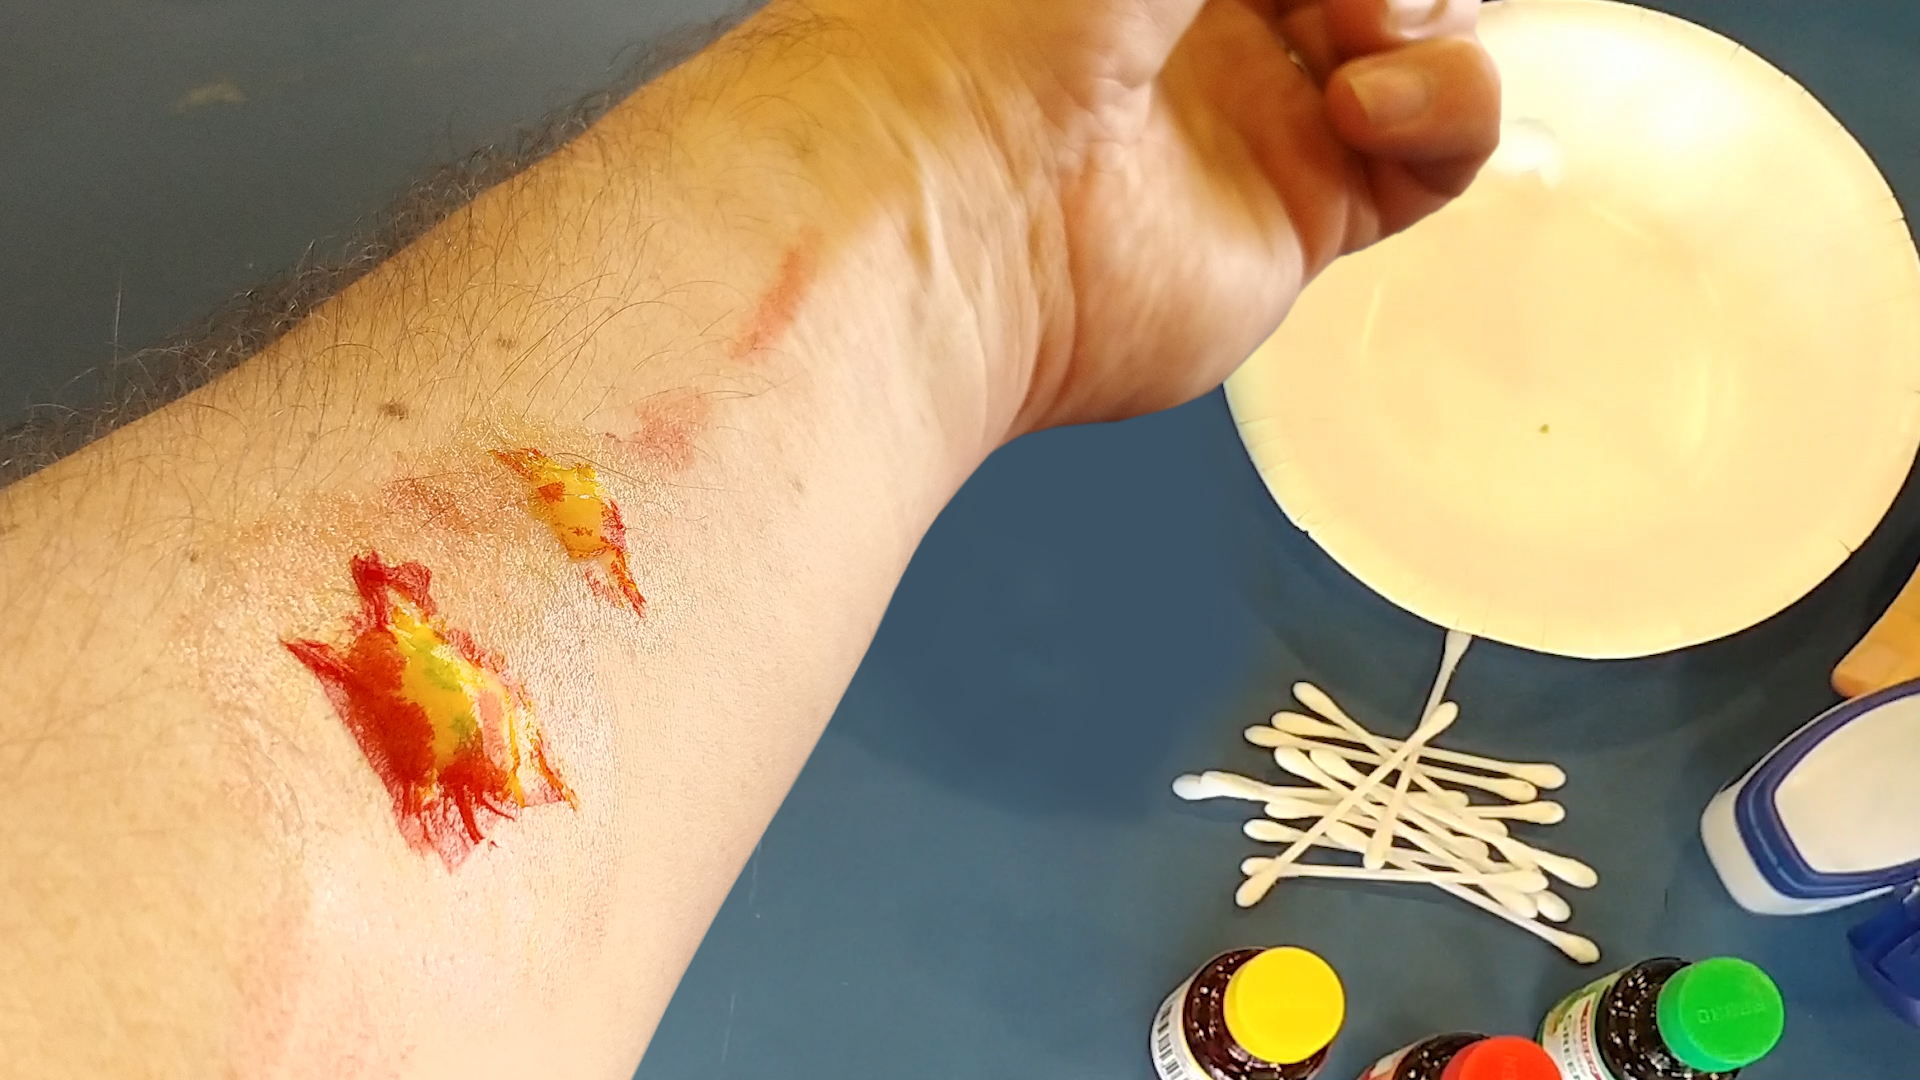 Fake special effects wound make-up